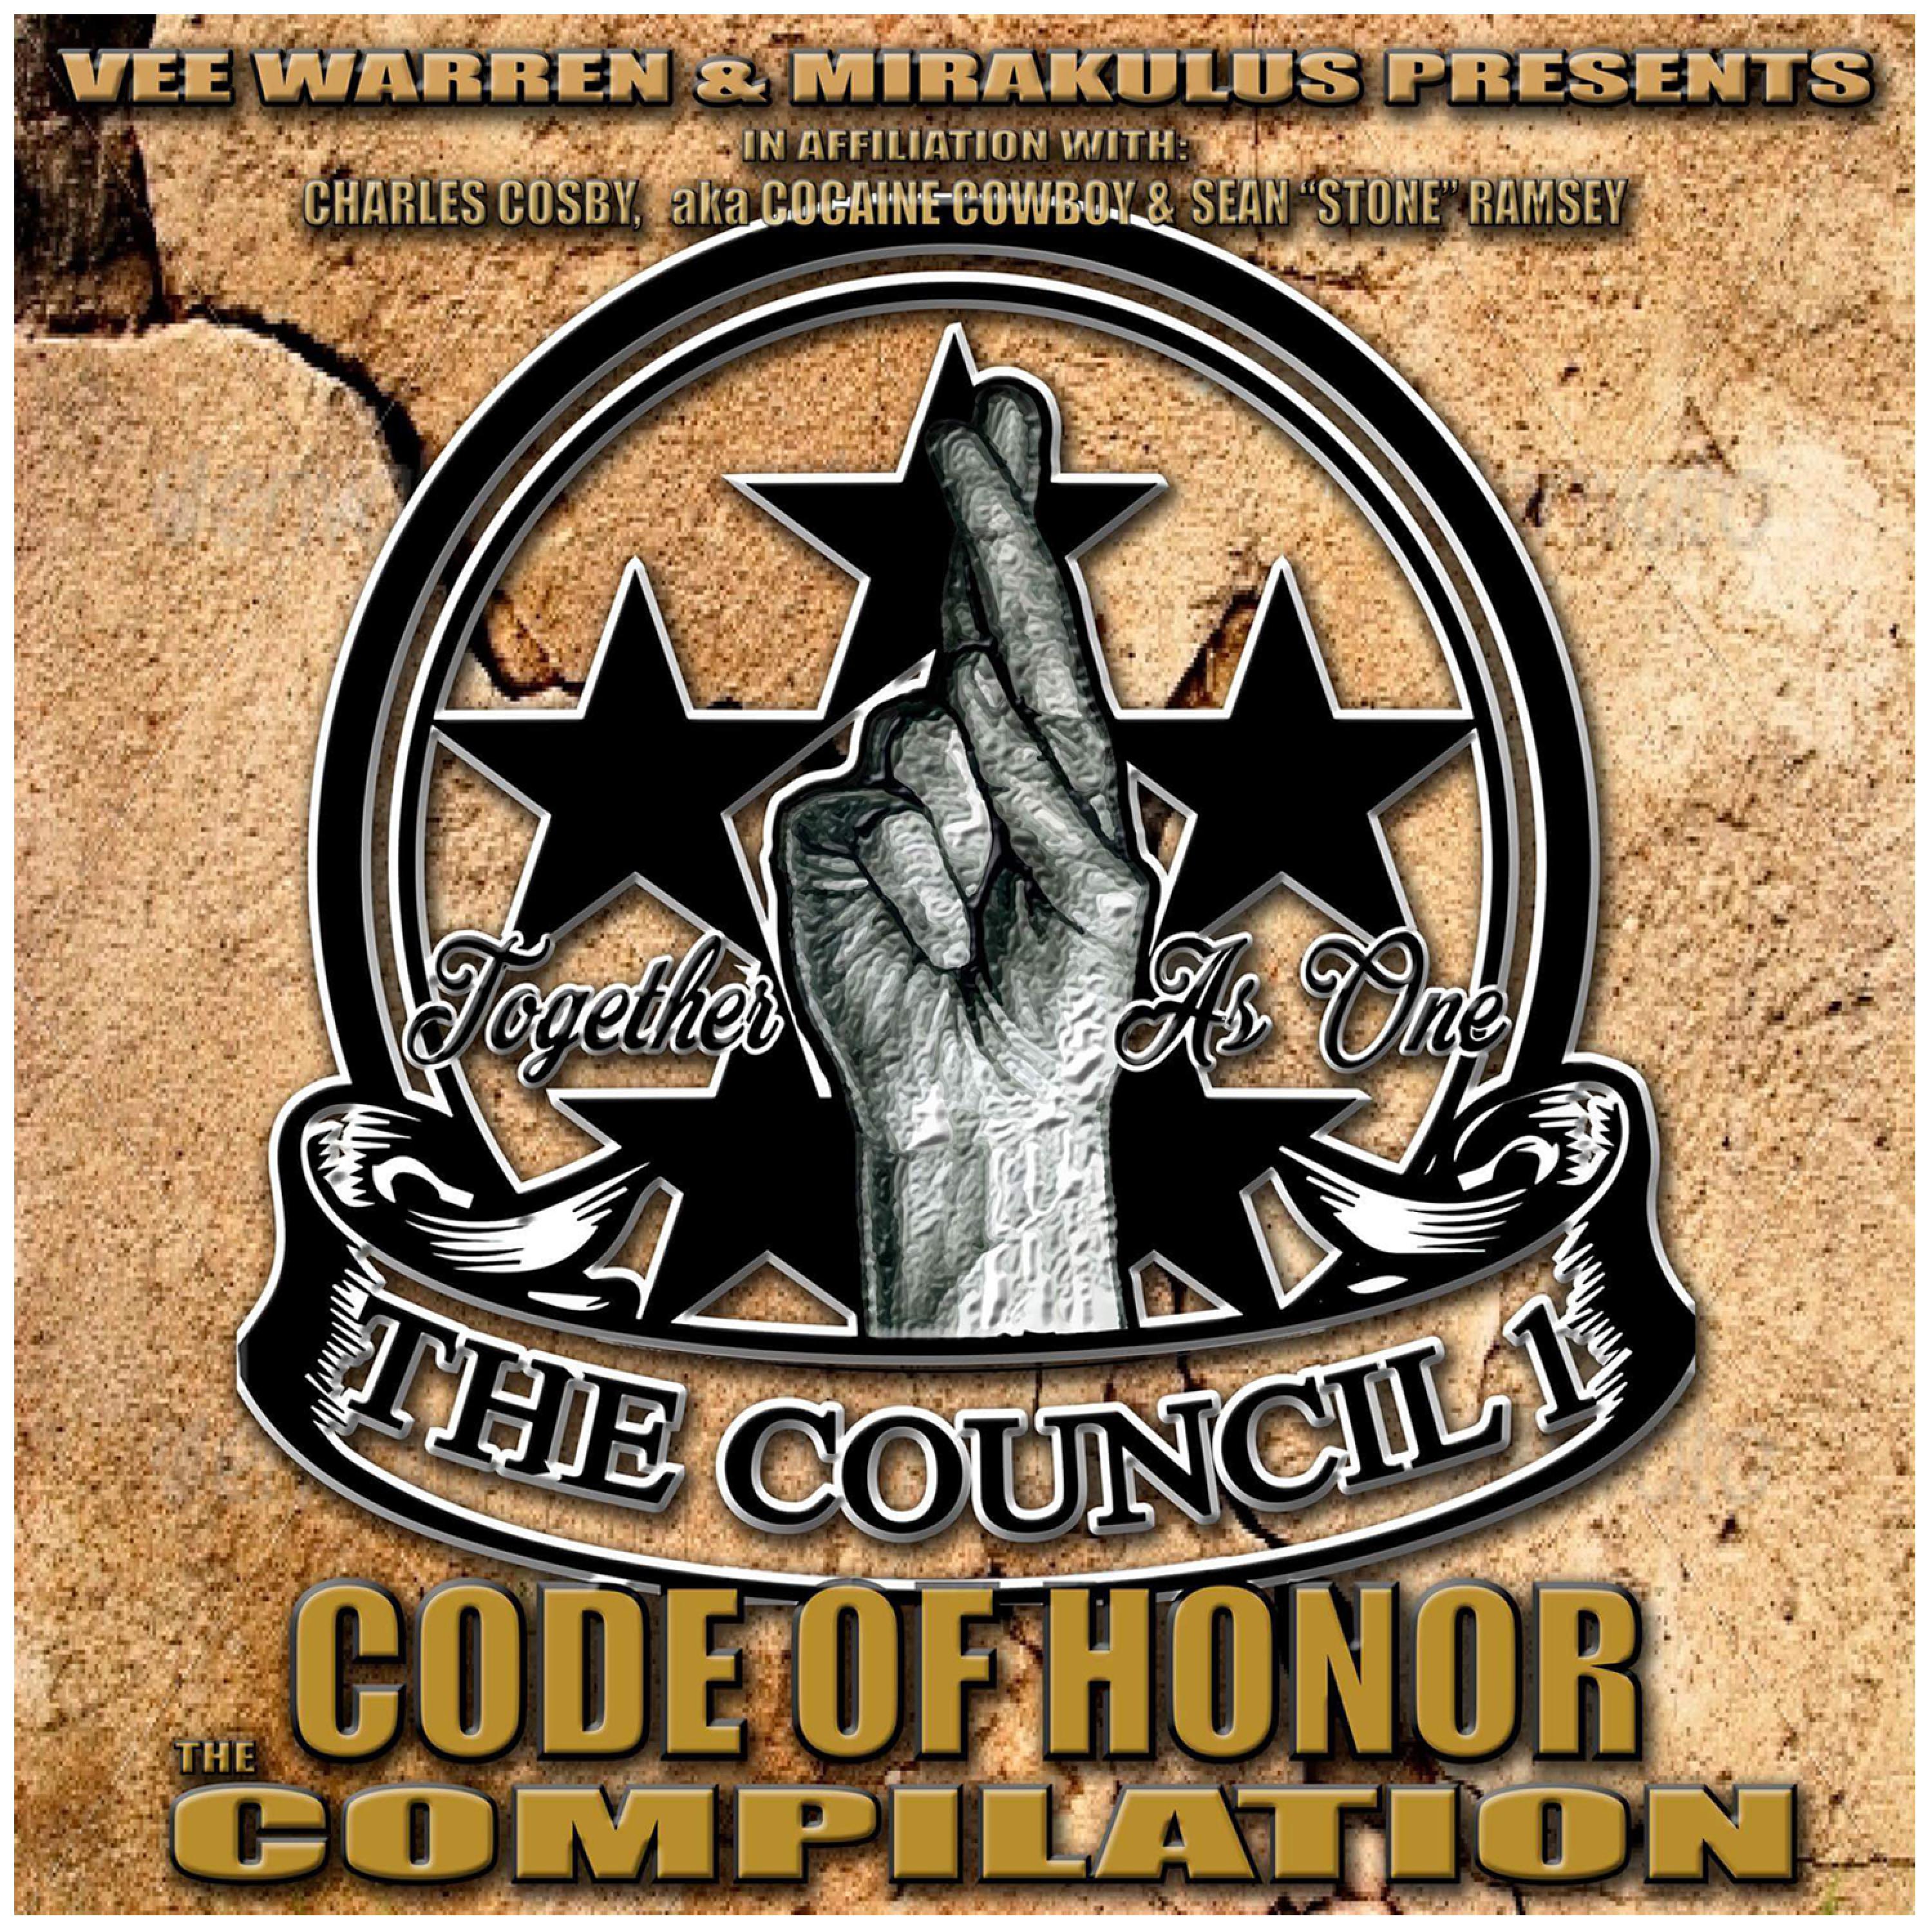 Code of Honor the Compilation